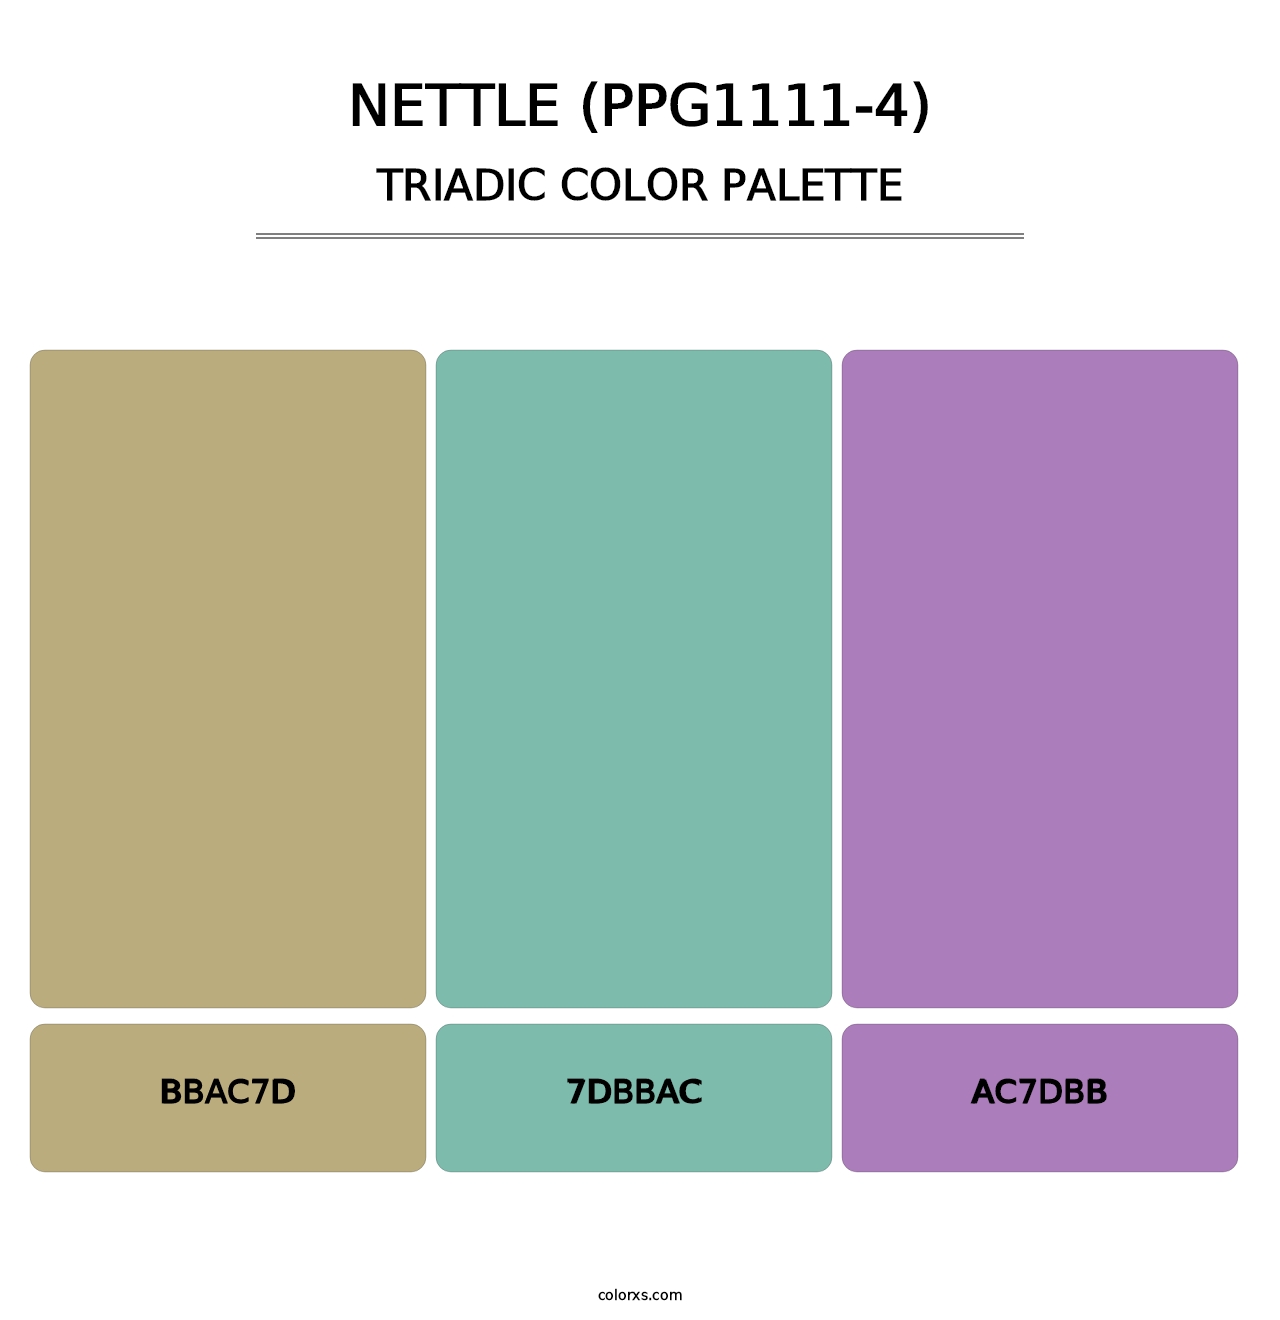 Nettle (PPG1111-4) - Triadic Color Palette